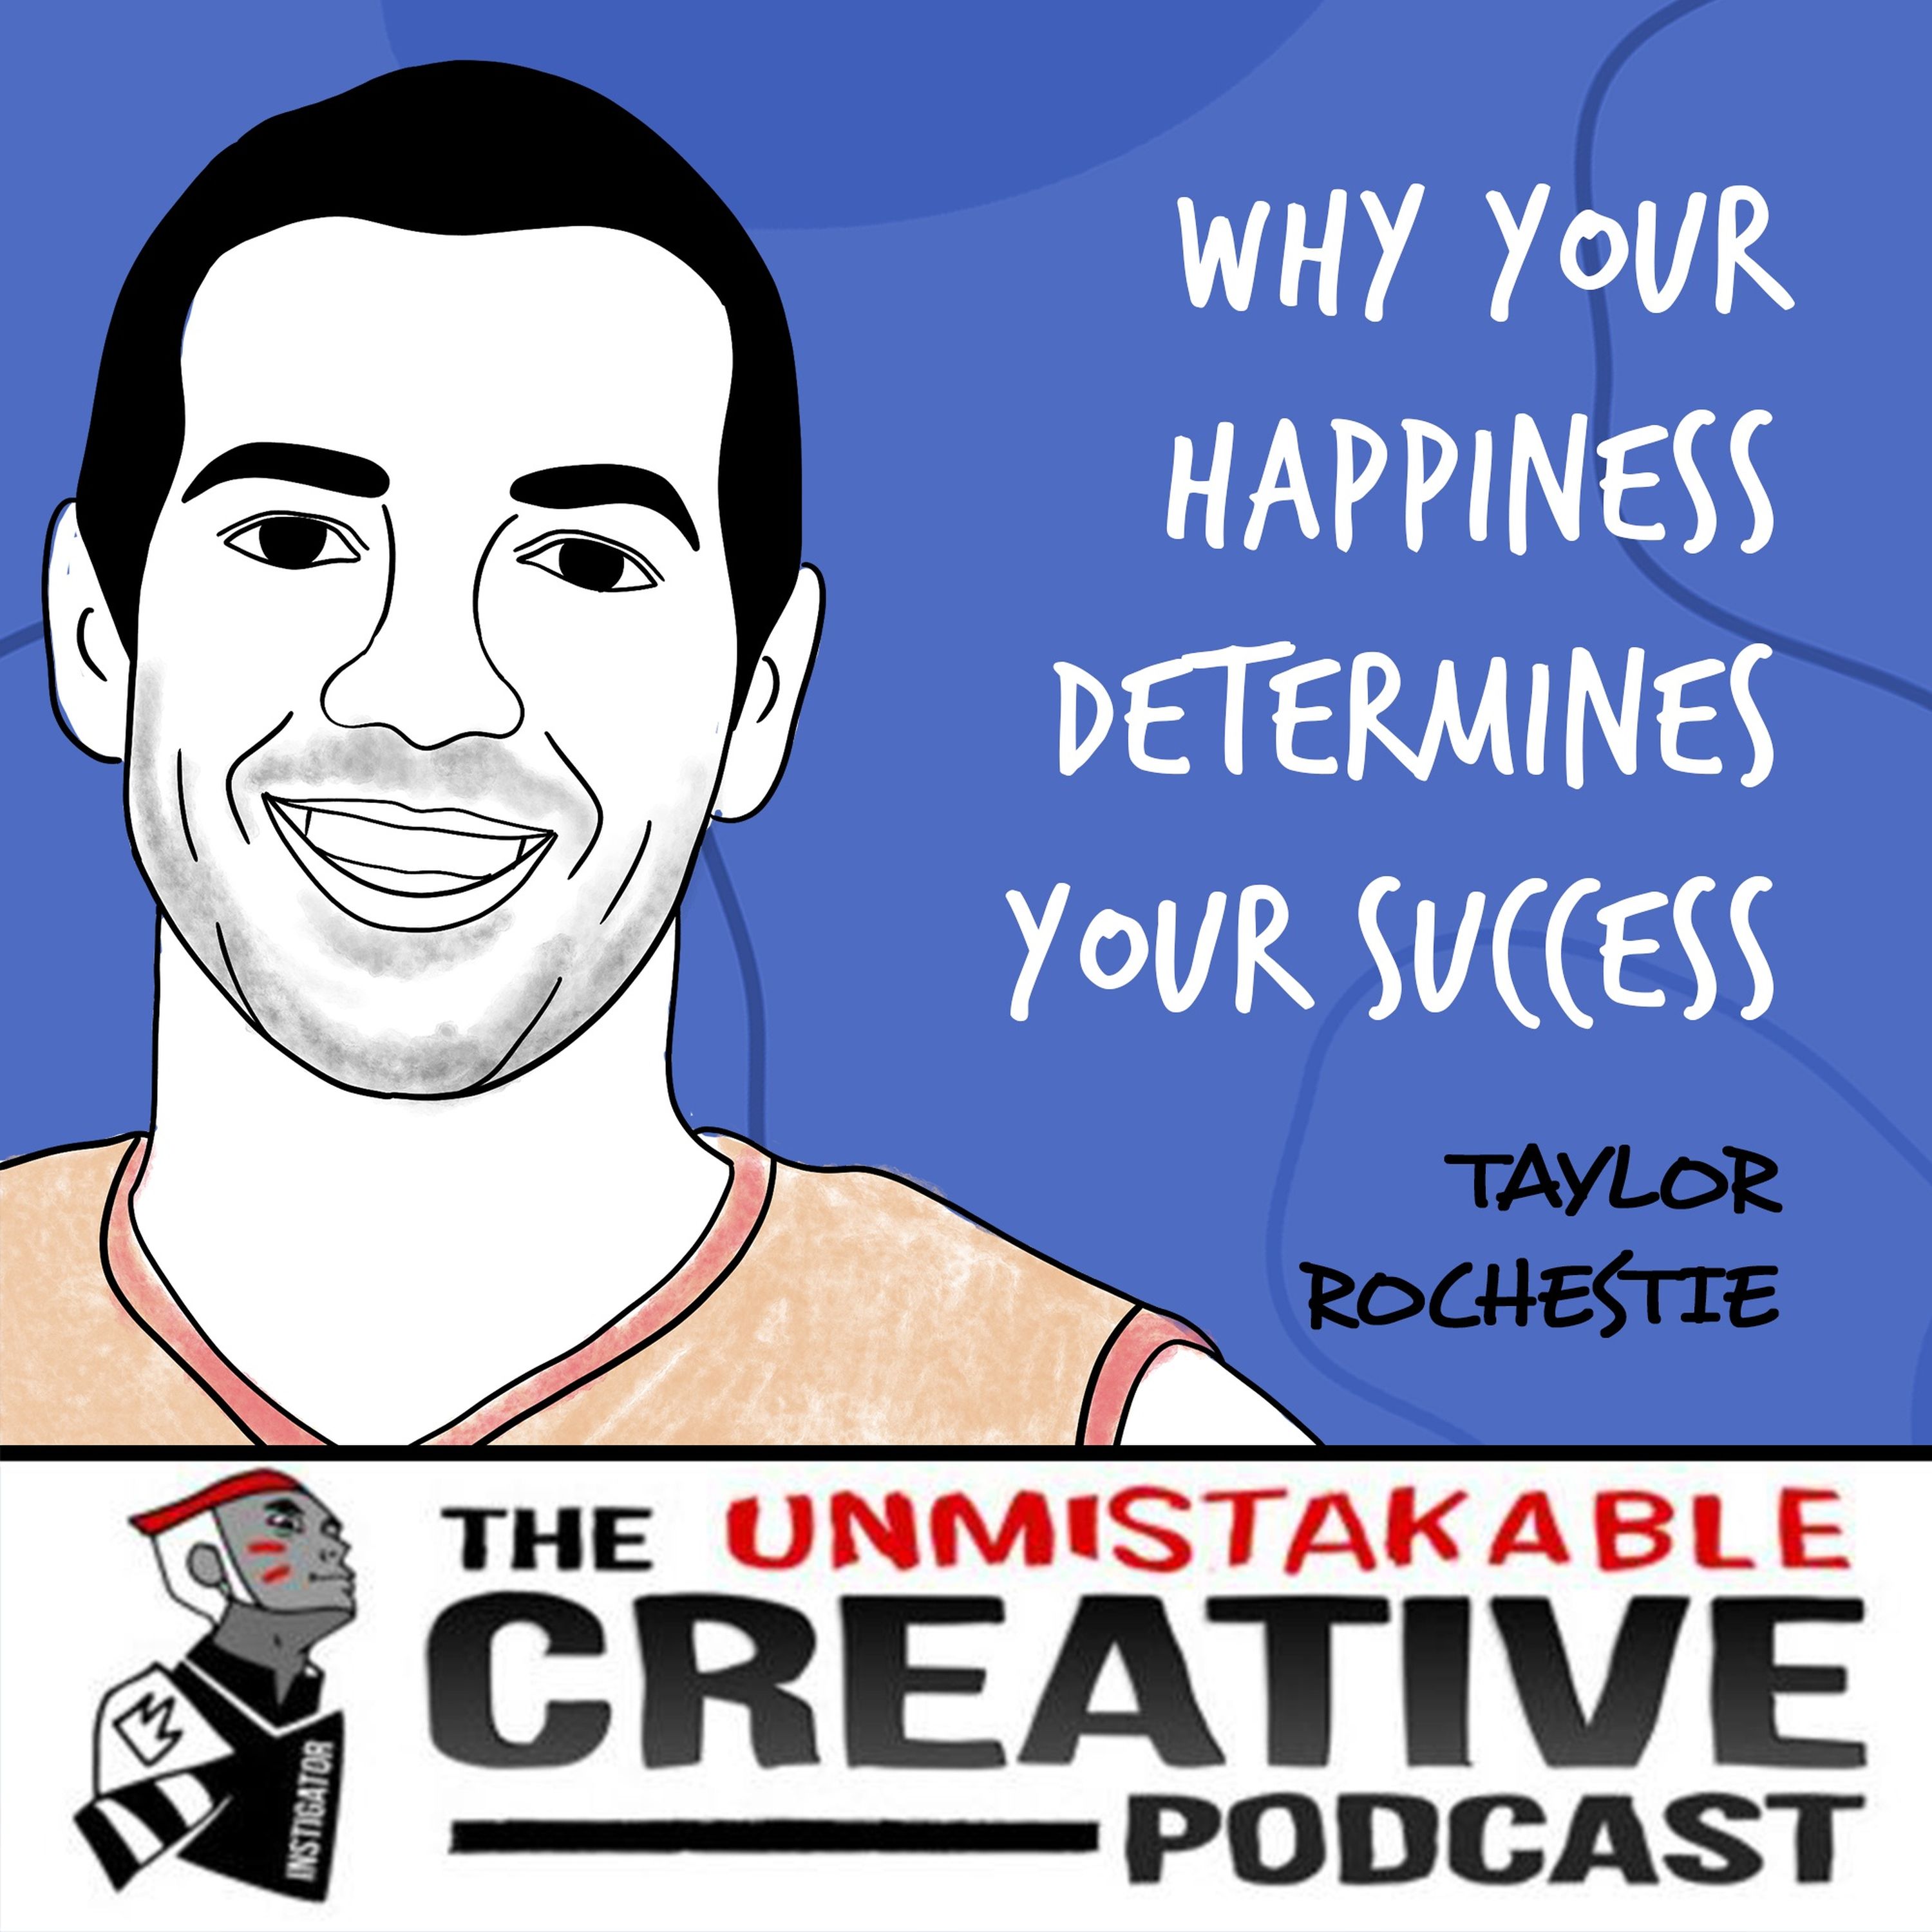 Taylor Rochestie | Why Your Happiness Determines Your Success Image